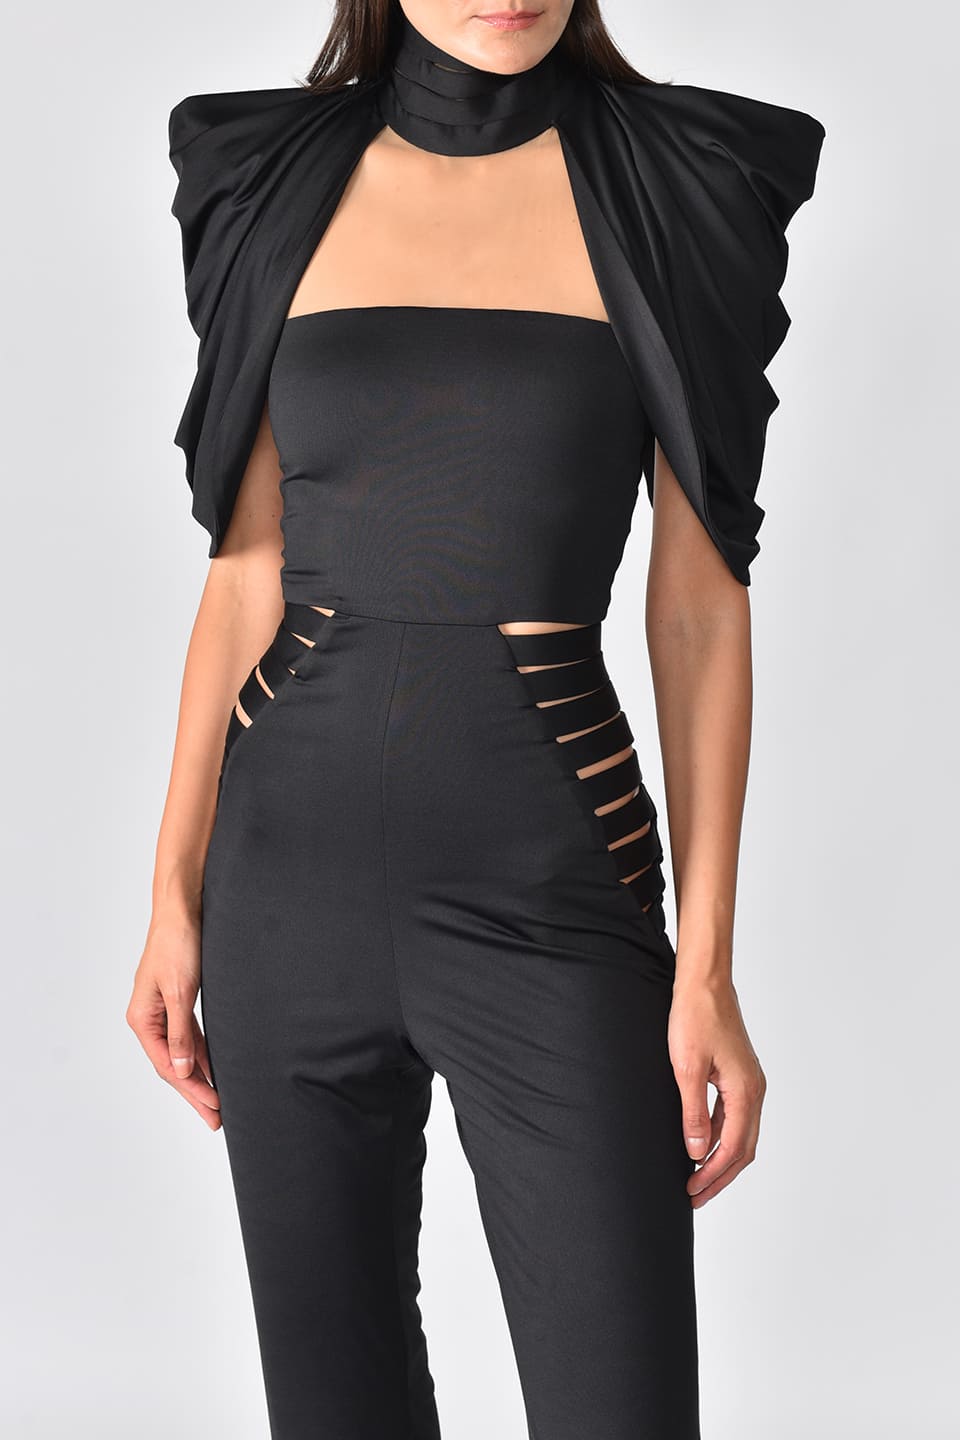 Thumbnail for Product gallery 4, Fashion designer jumpsuit in black color, ideal for special occasions